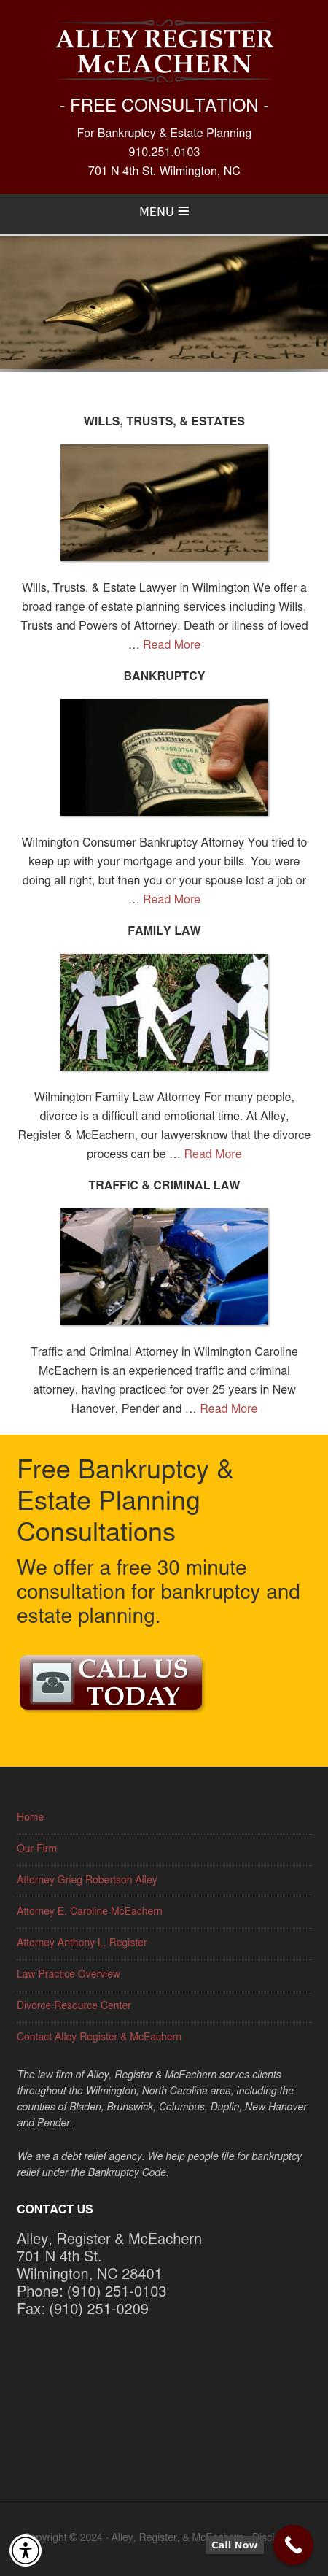 Alley Register McEachern Attorneys At Law - Wilmington NC Lawyers